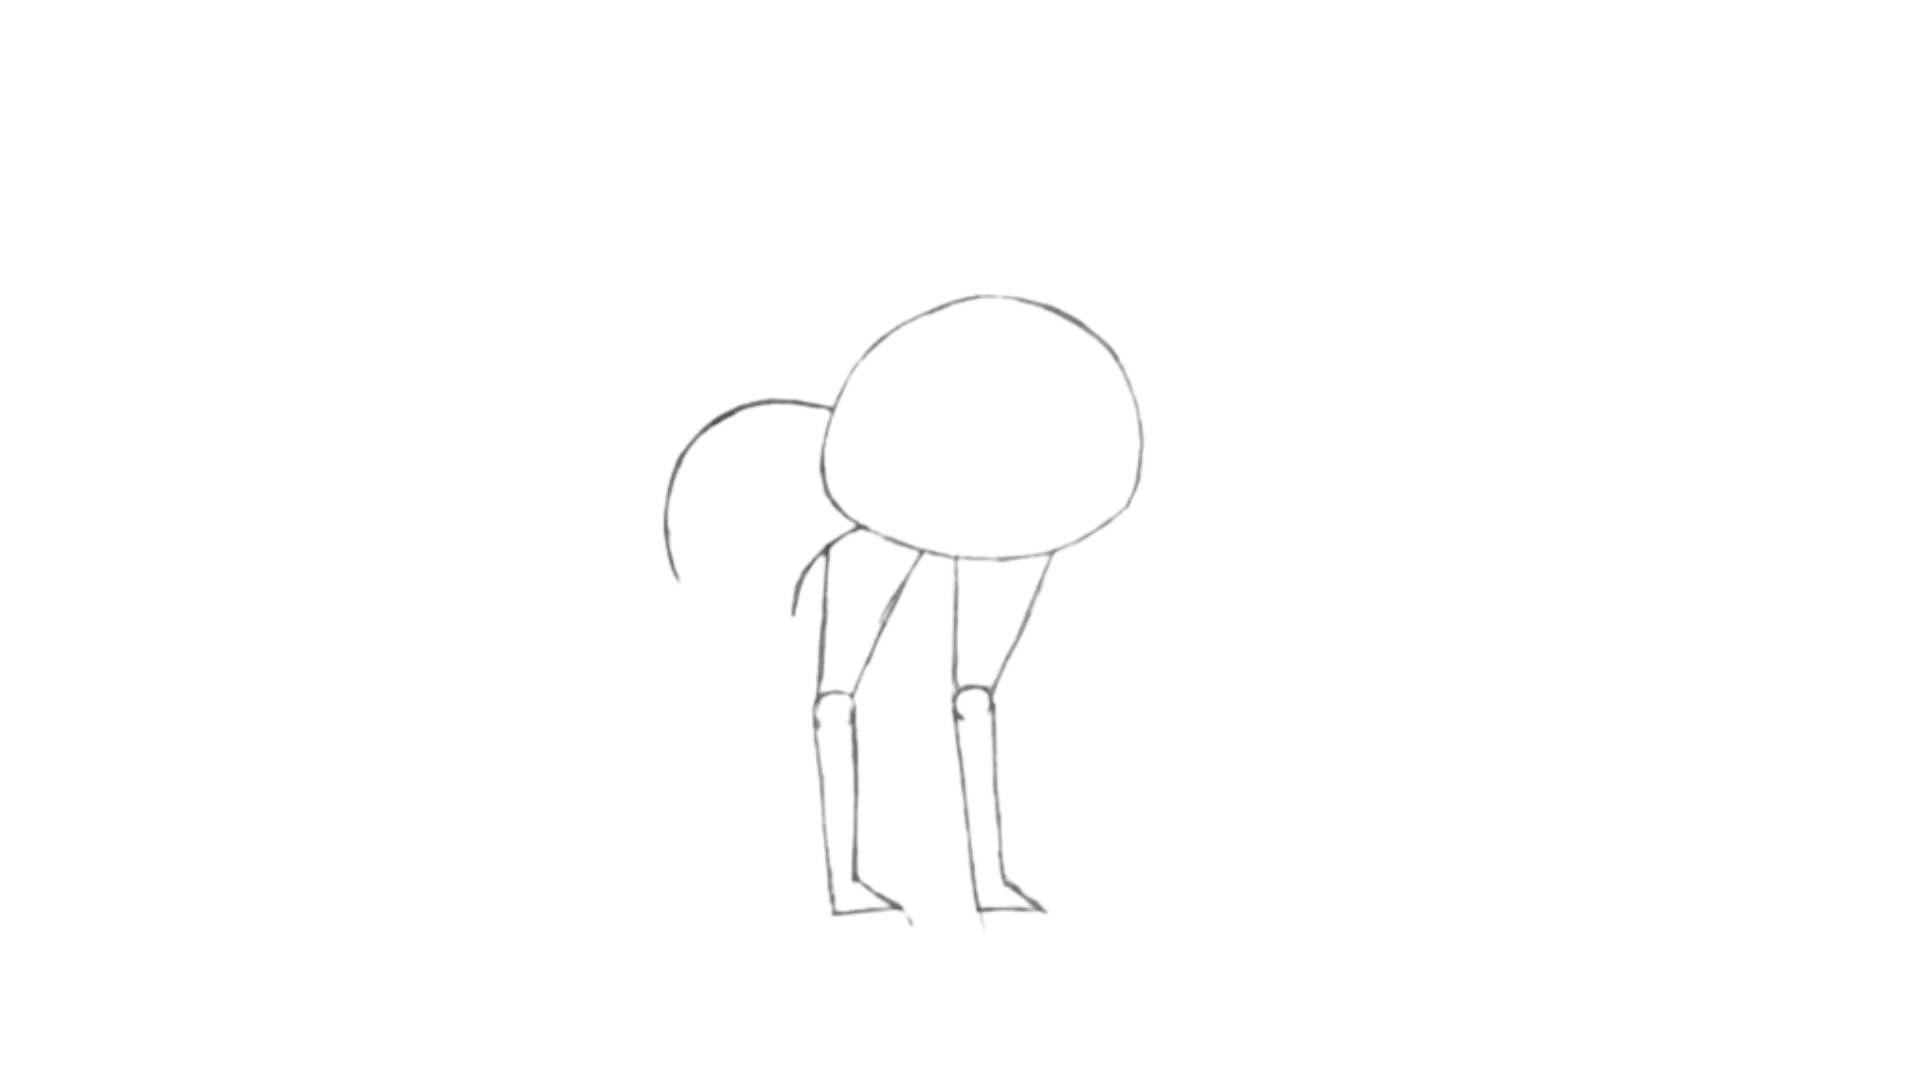 Ostrich drawing step 3